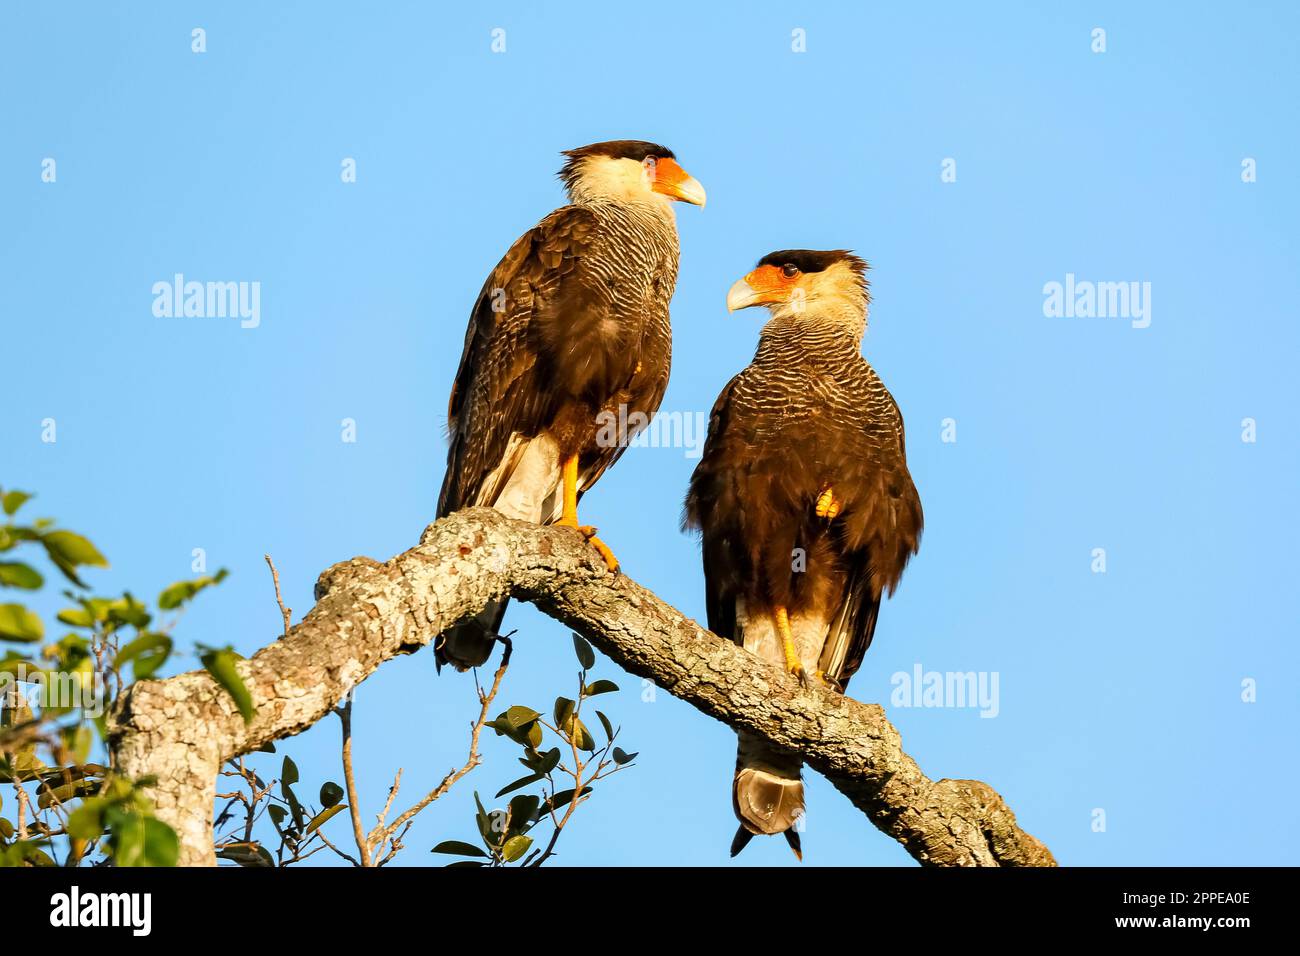 Two Caracara perching on a tree branch, facing each other against blue sky, Pantanal Wetlands, Mato Grosso, Brazil Stock Photo